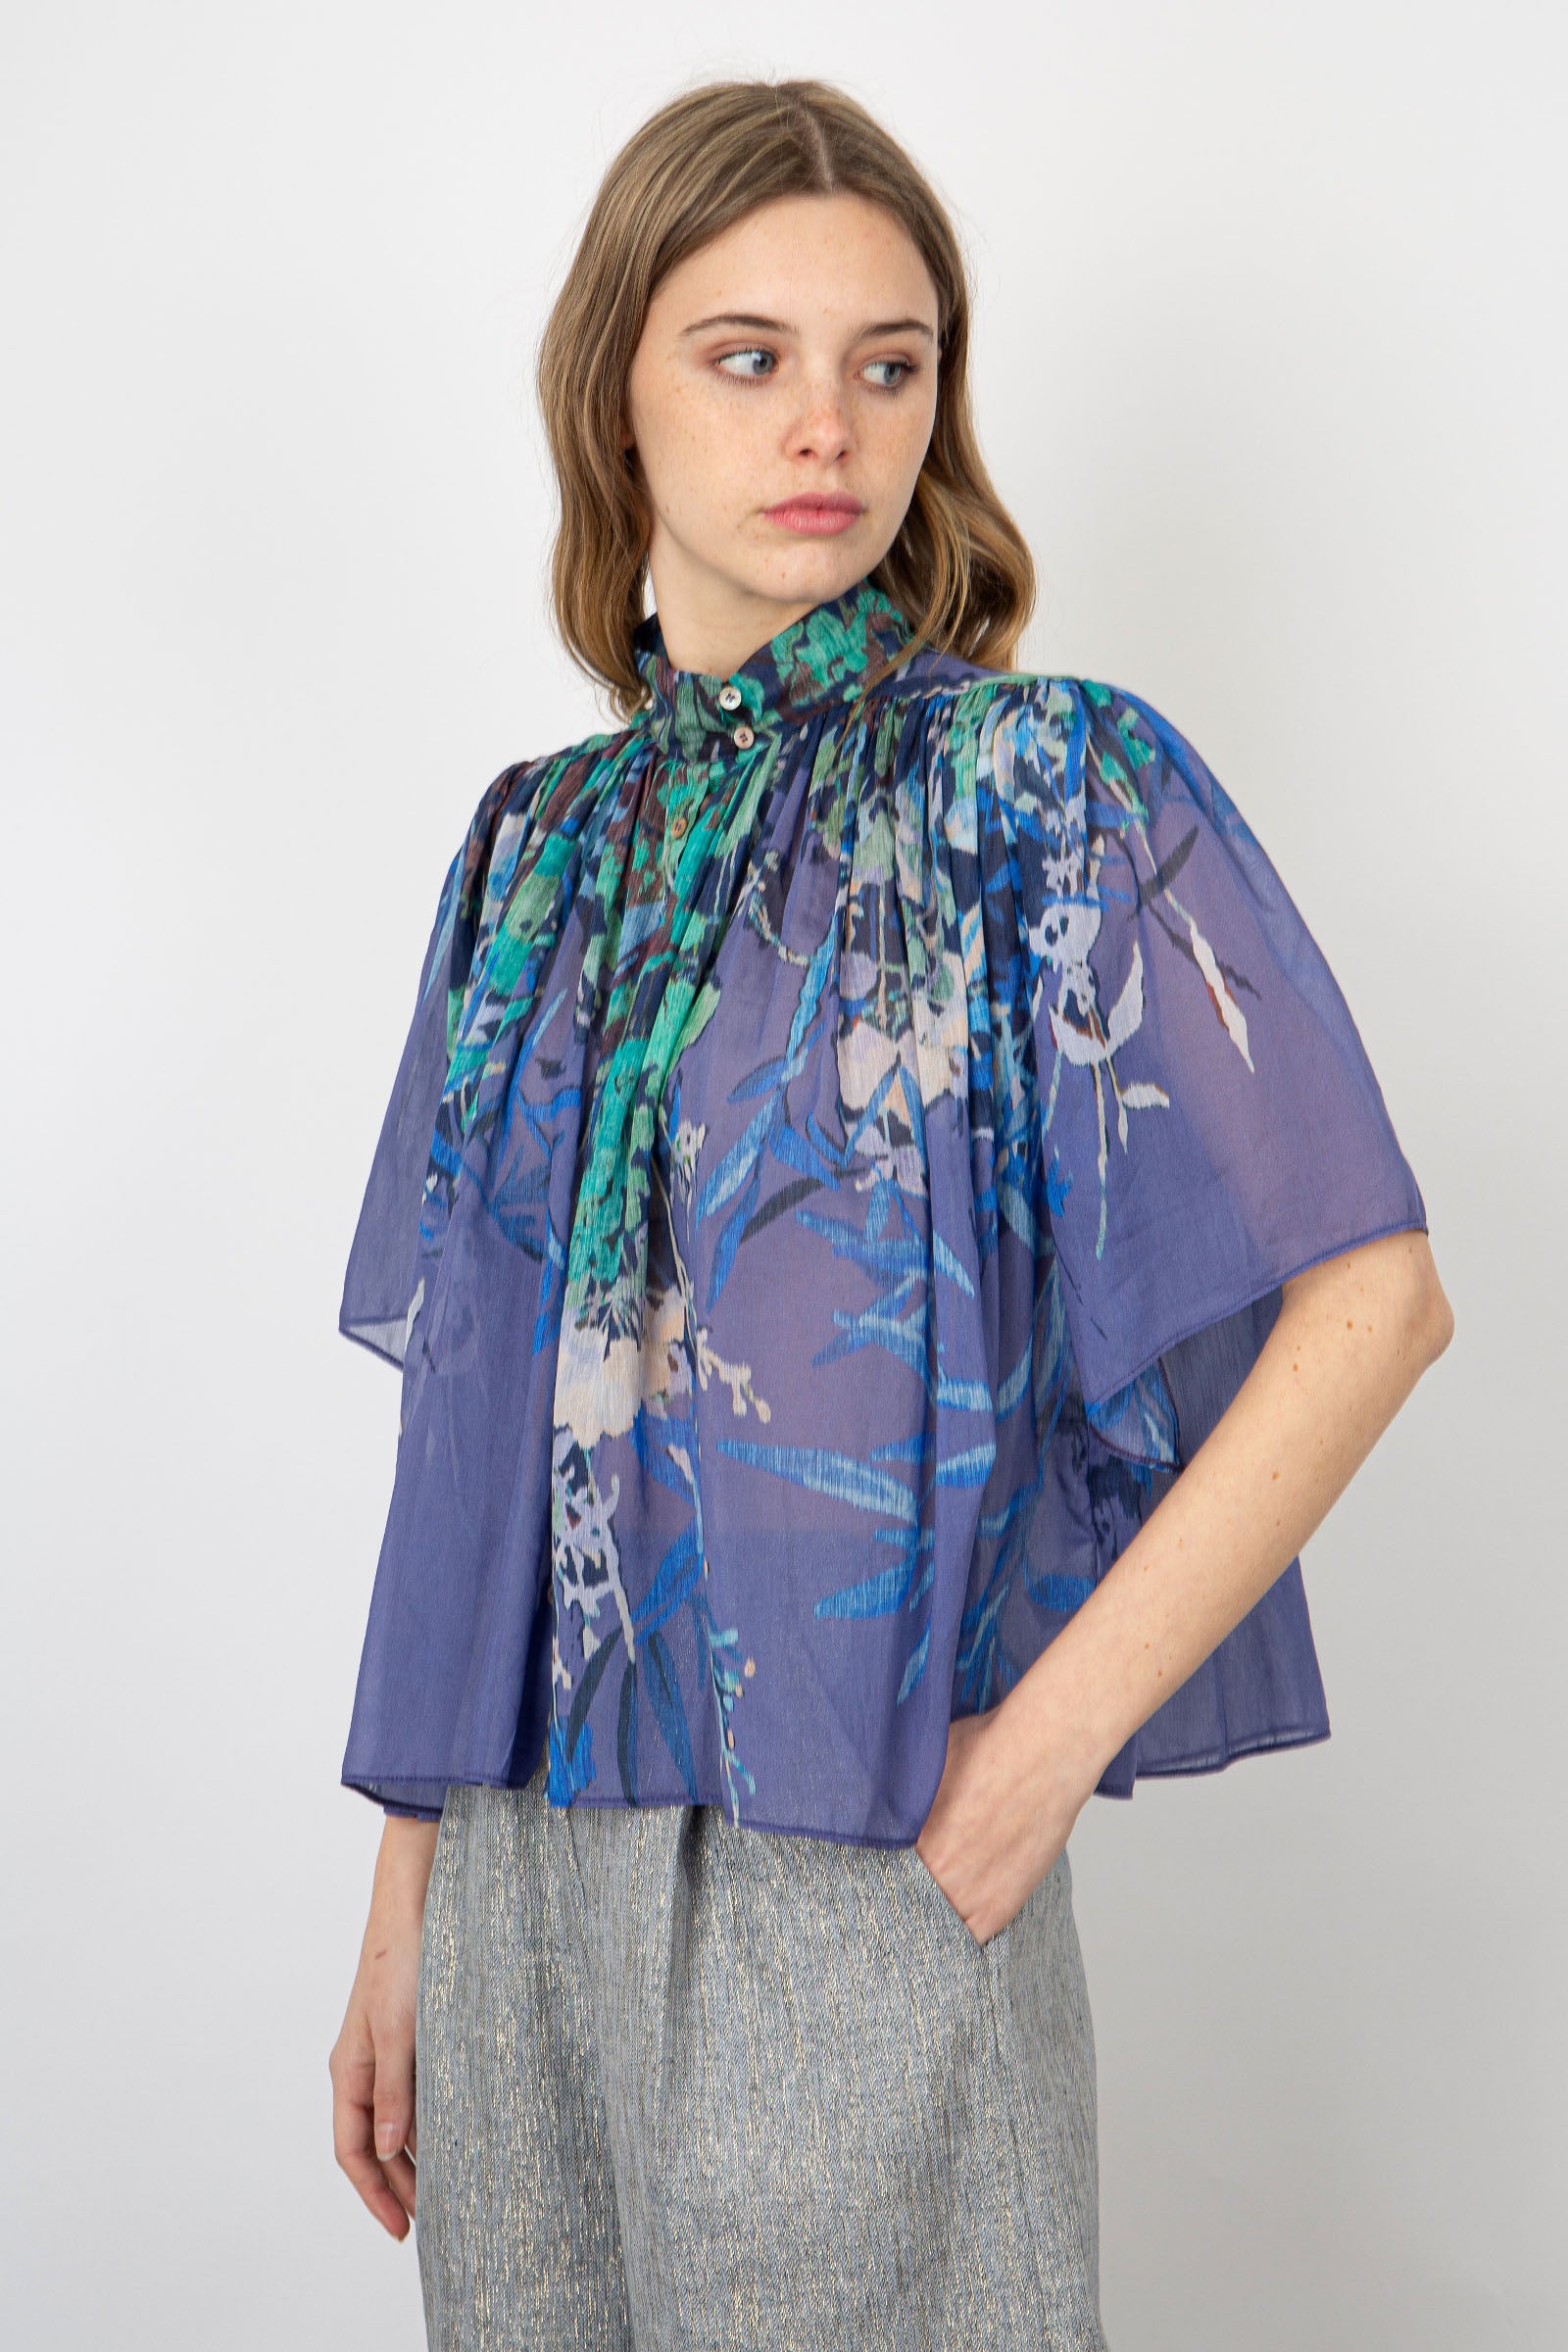 Forte Forte Cotton Voile Shirt in Purple with Print - 3